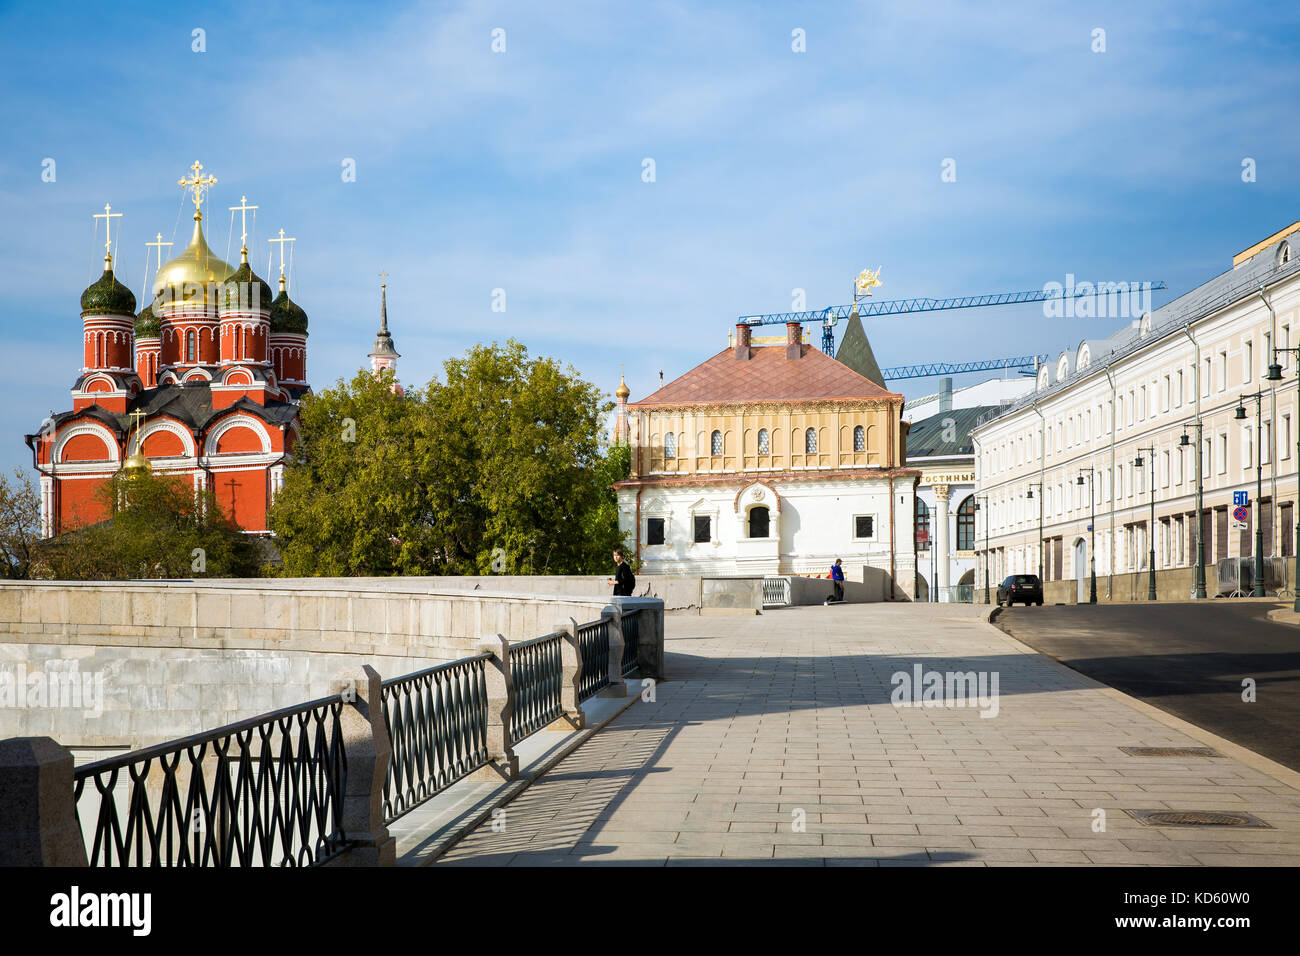 Varvarka street con le cattedrali e chiese a Mosca, Russia Foto Stock